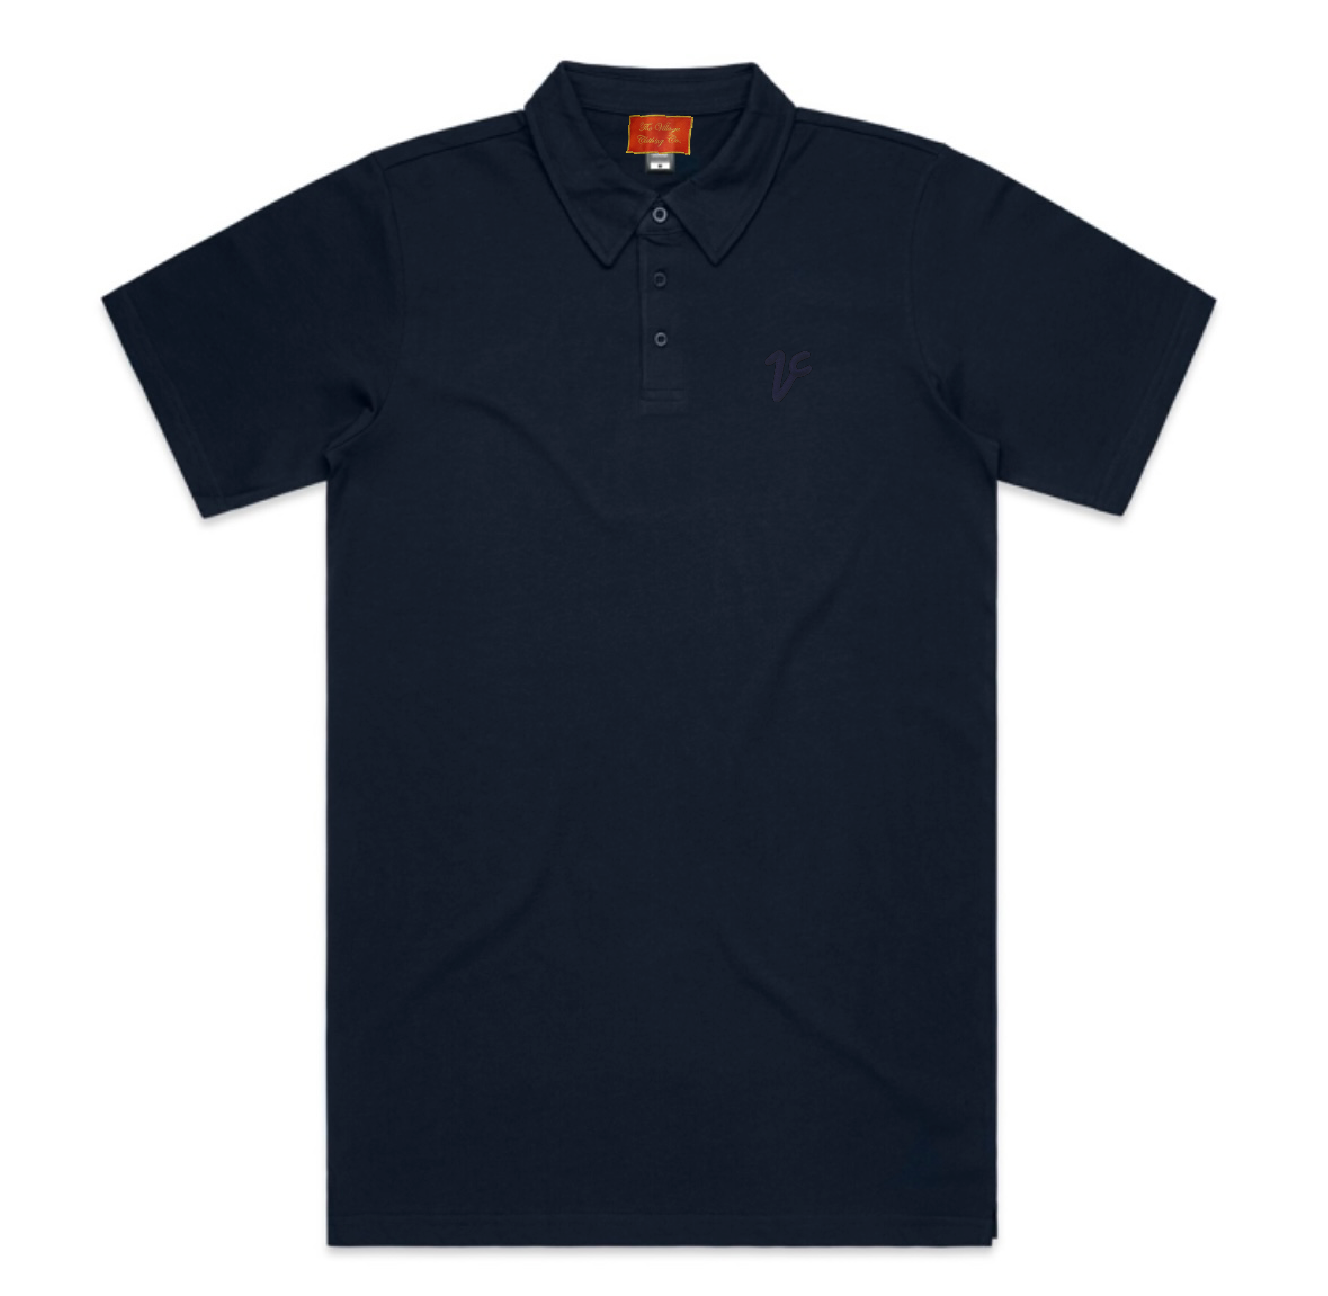 Better Yet the Navy VC Polo